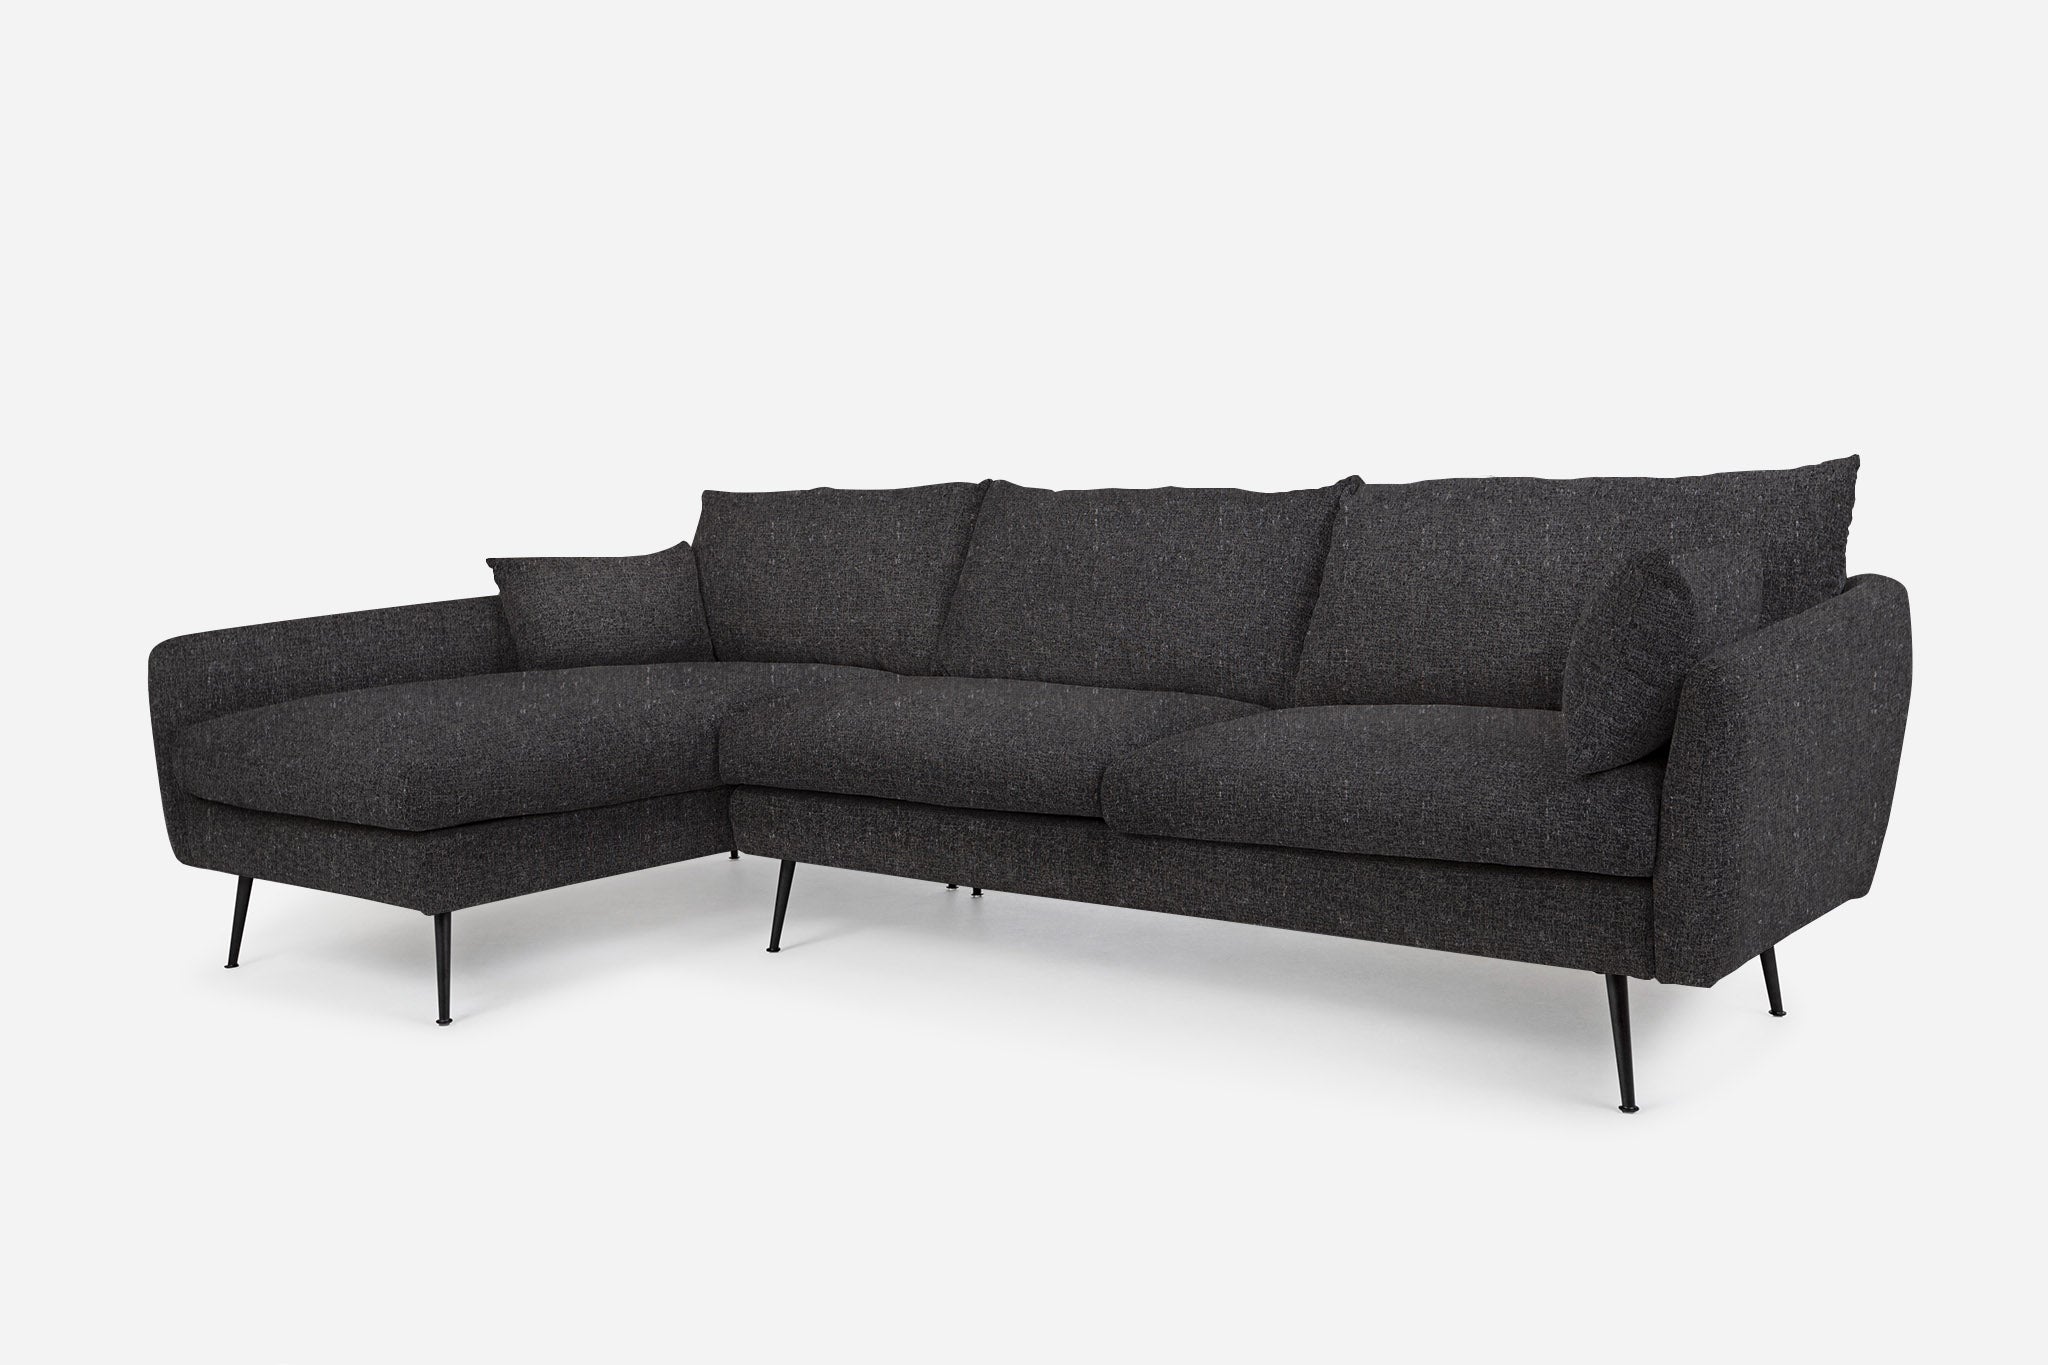 park sectional sofa shown in charcoal with black legs left facing